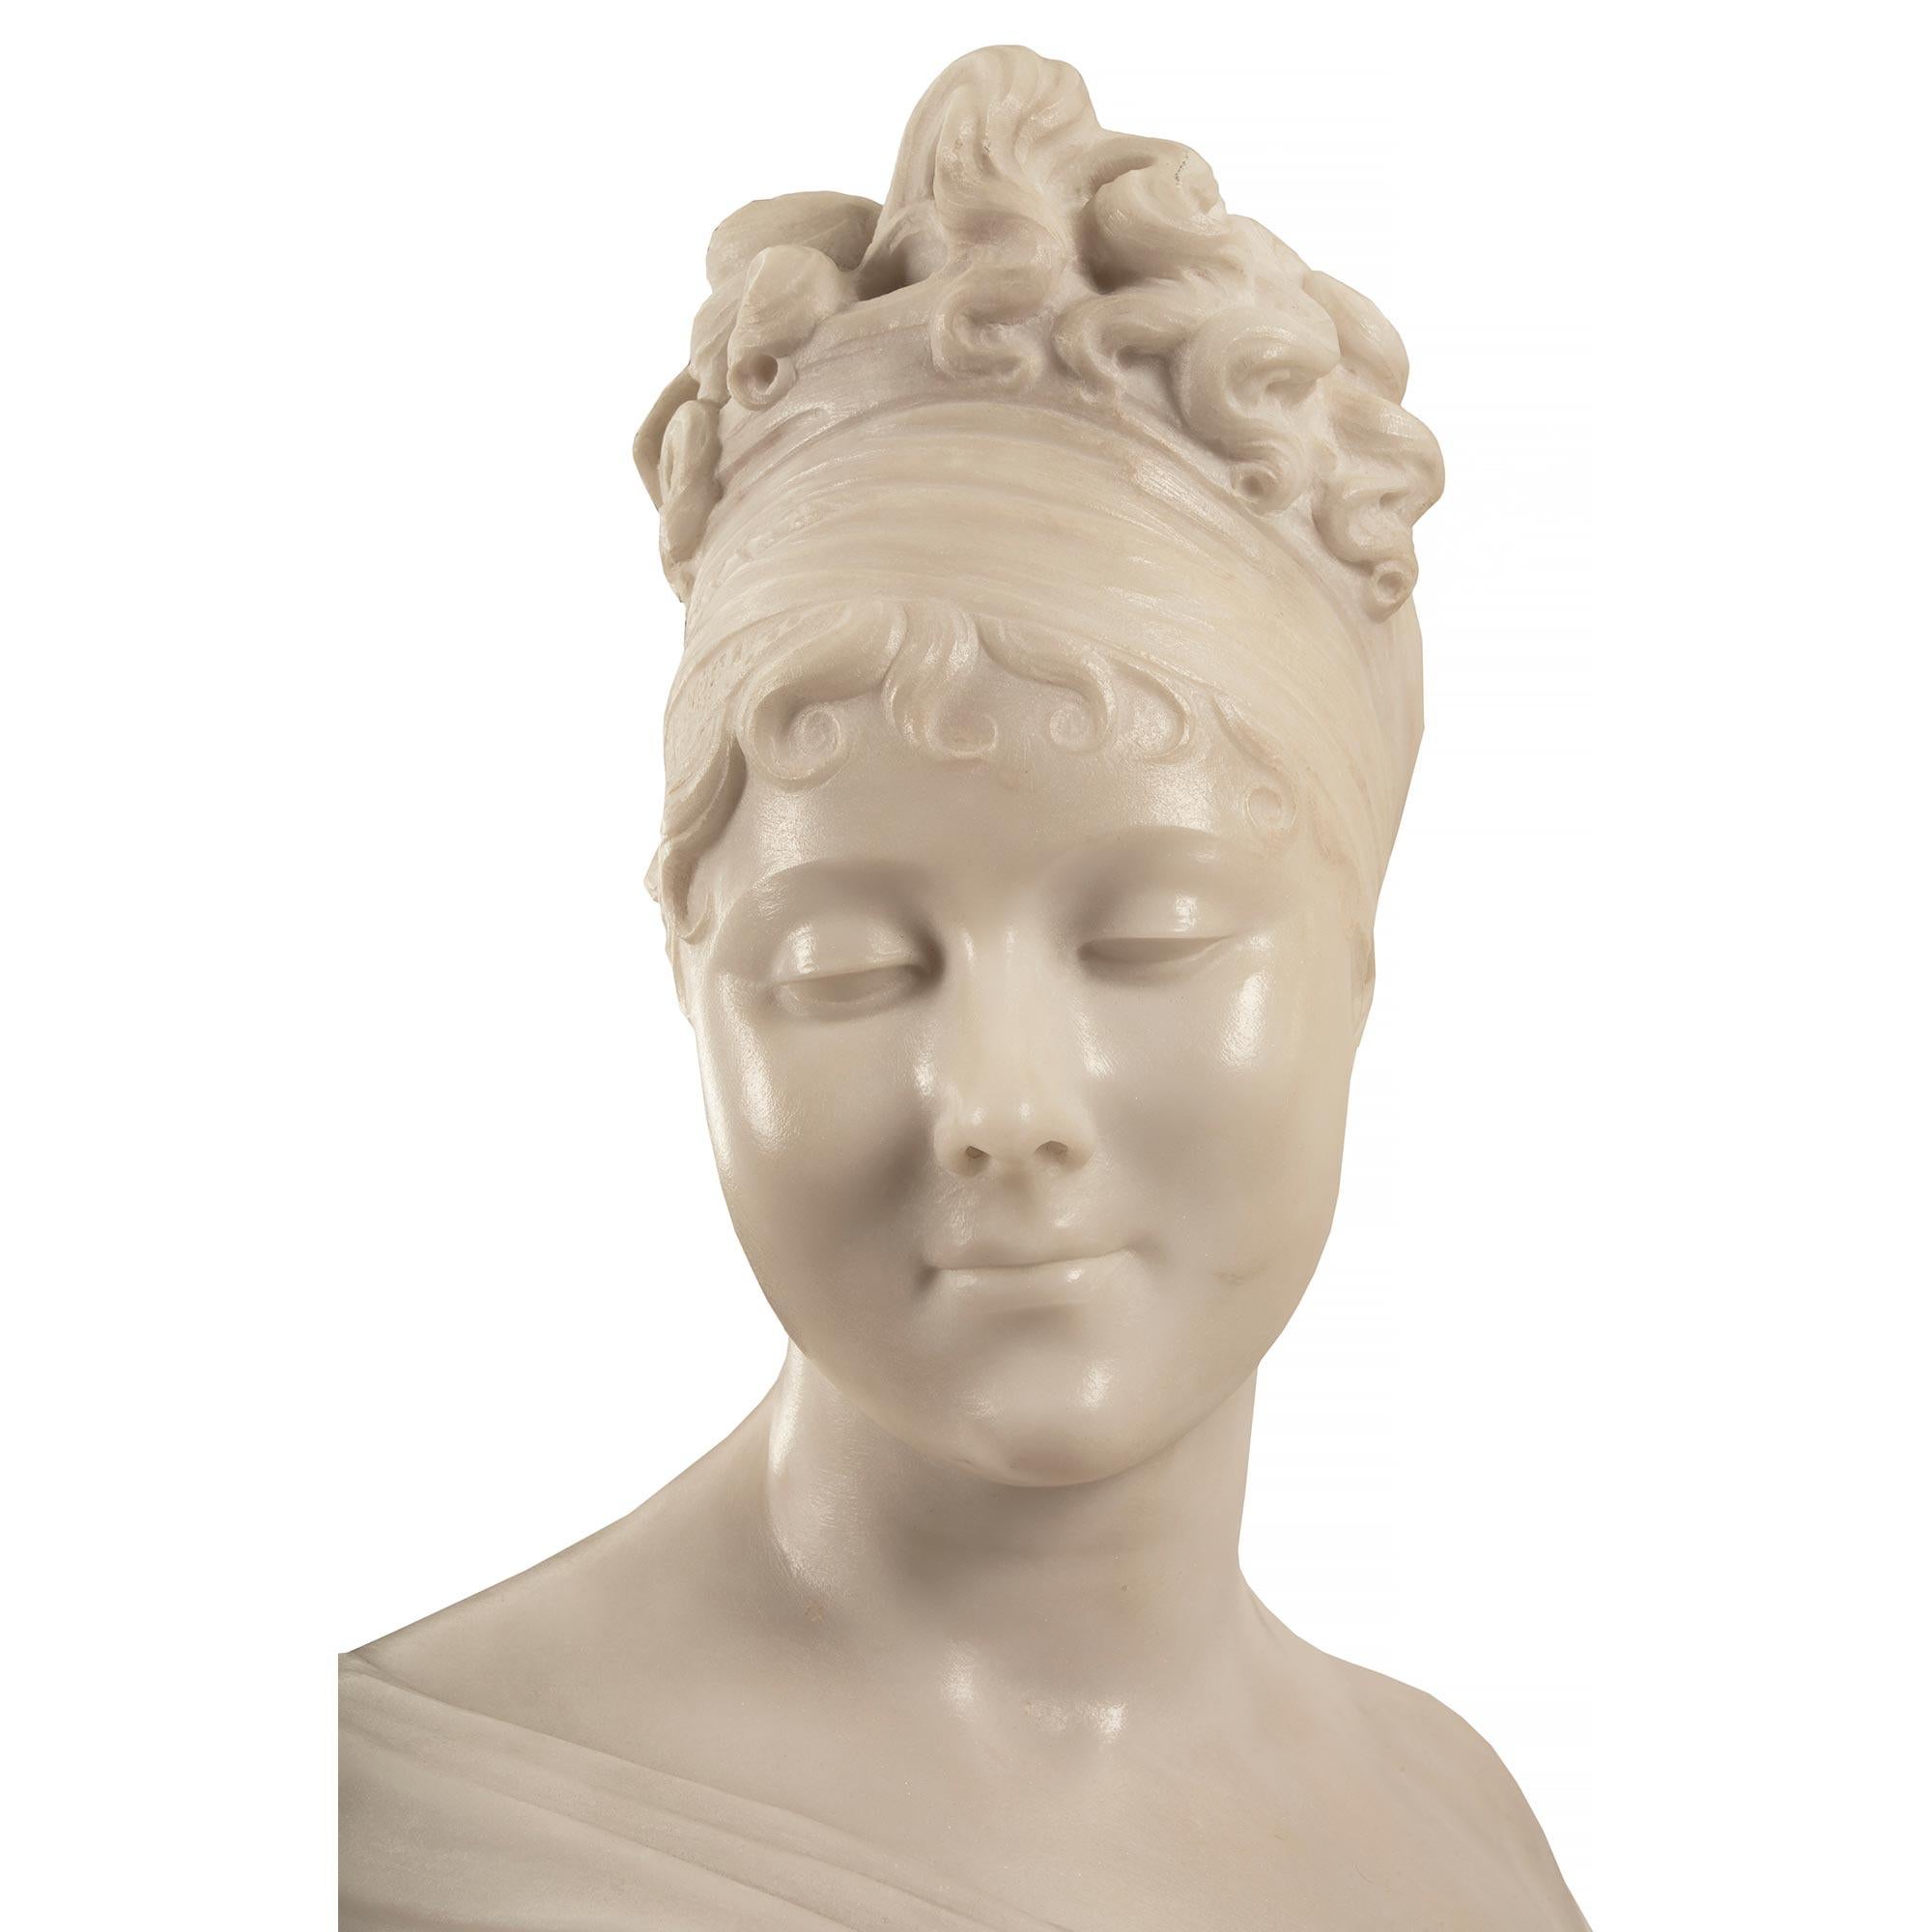 Italian 19th Century Neoclassical St. Carrara Marble Bust of Juliette Recamier For Sale 4